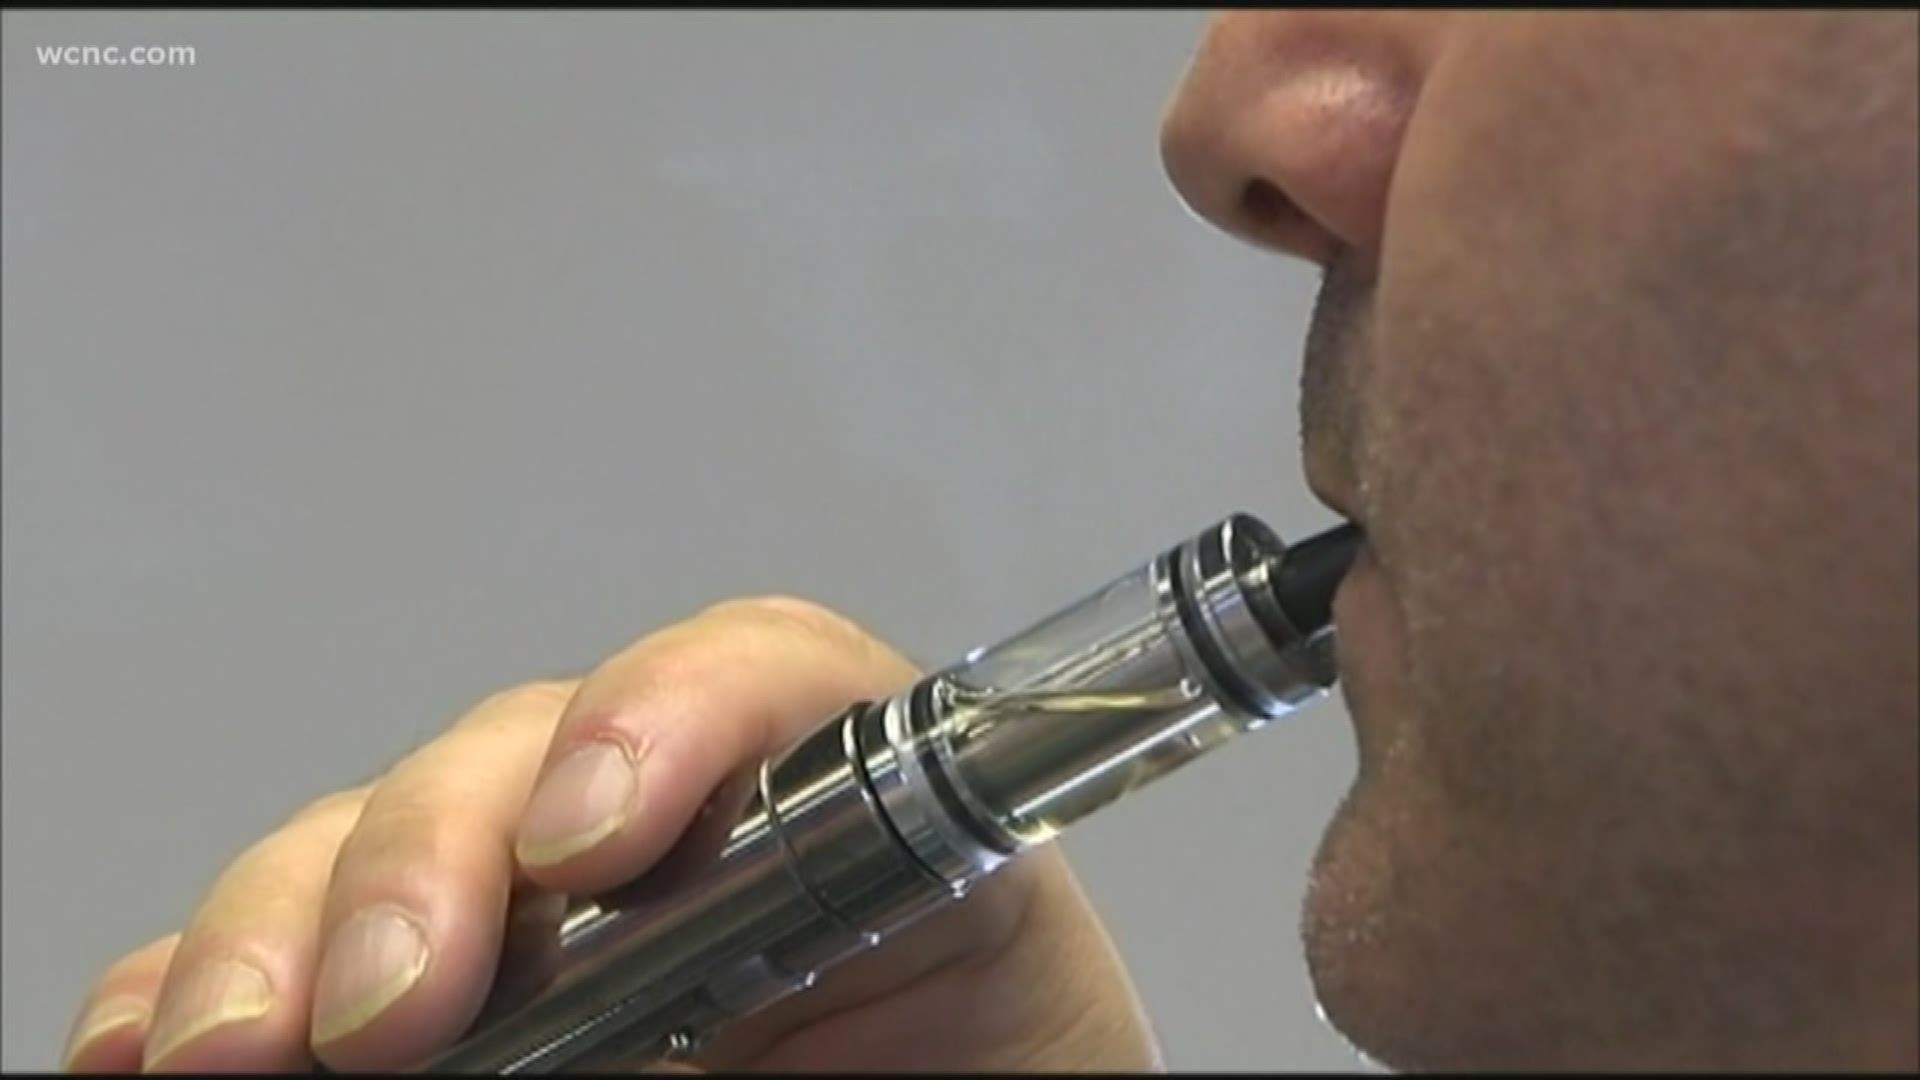 A 24-year-old Texas father placed on life support after starting to vape six months ago. A 16-year-old Texas high school student was hospitalized after passing out from a vaping scare.